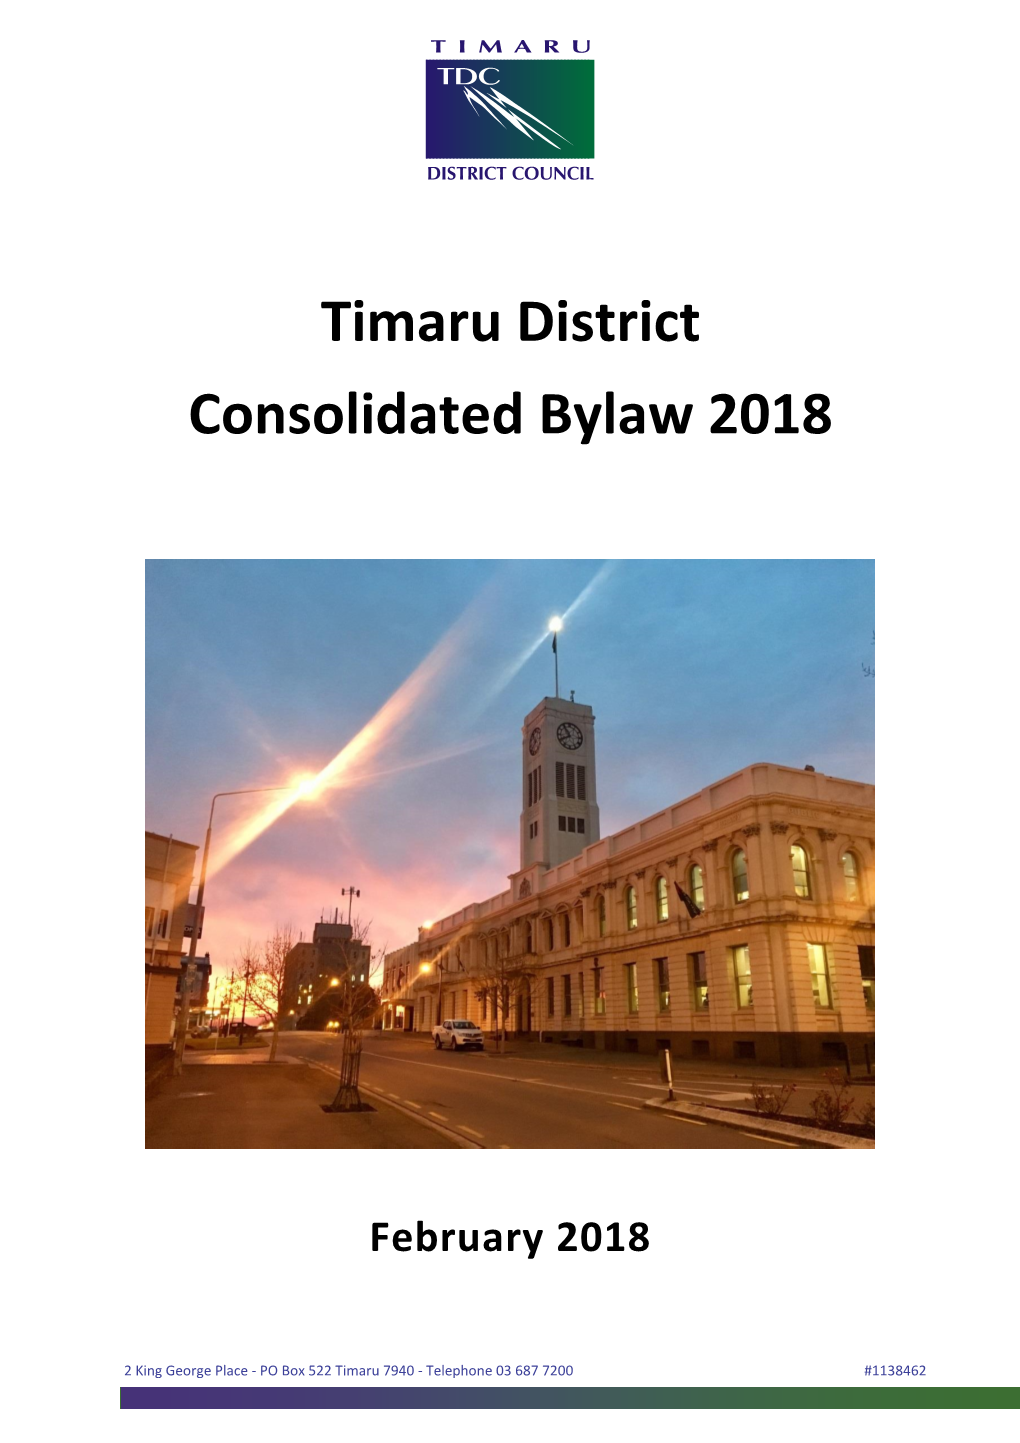 Timaru District Consolidated Bylaw 2018